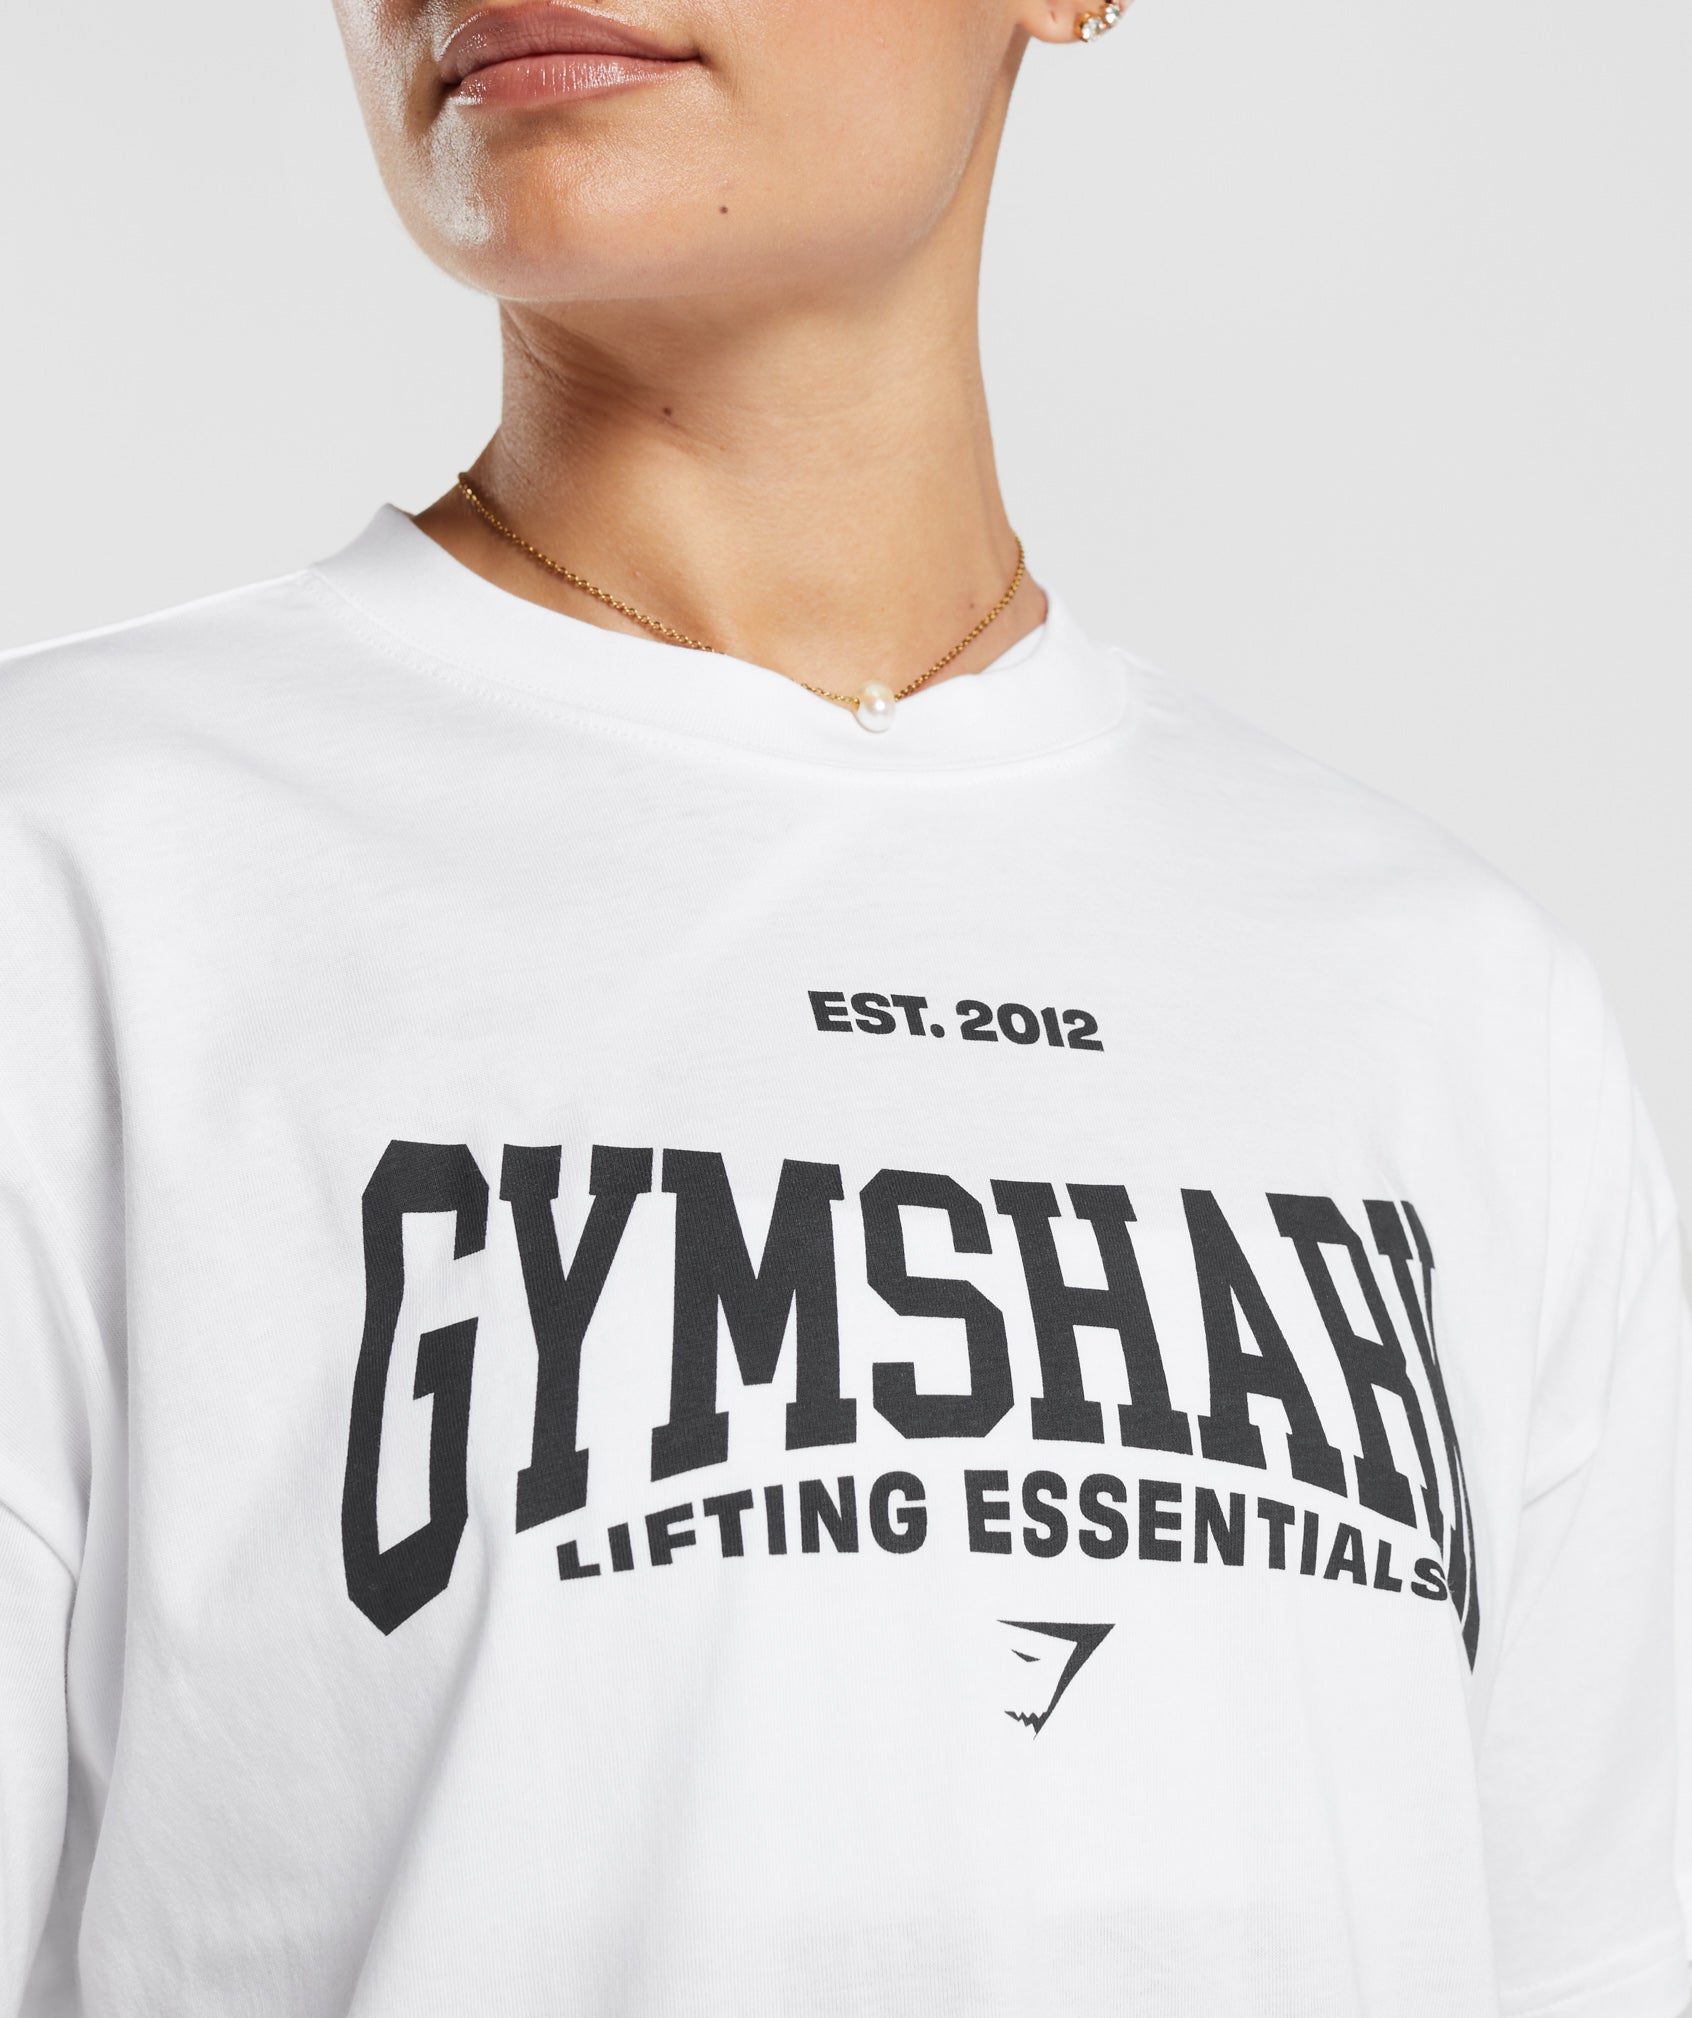 Lifting Essentials Oversized T-shirt in White - view 4